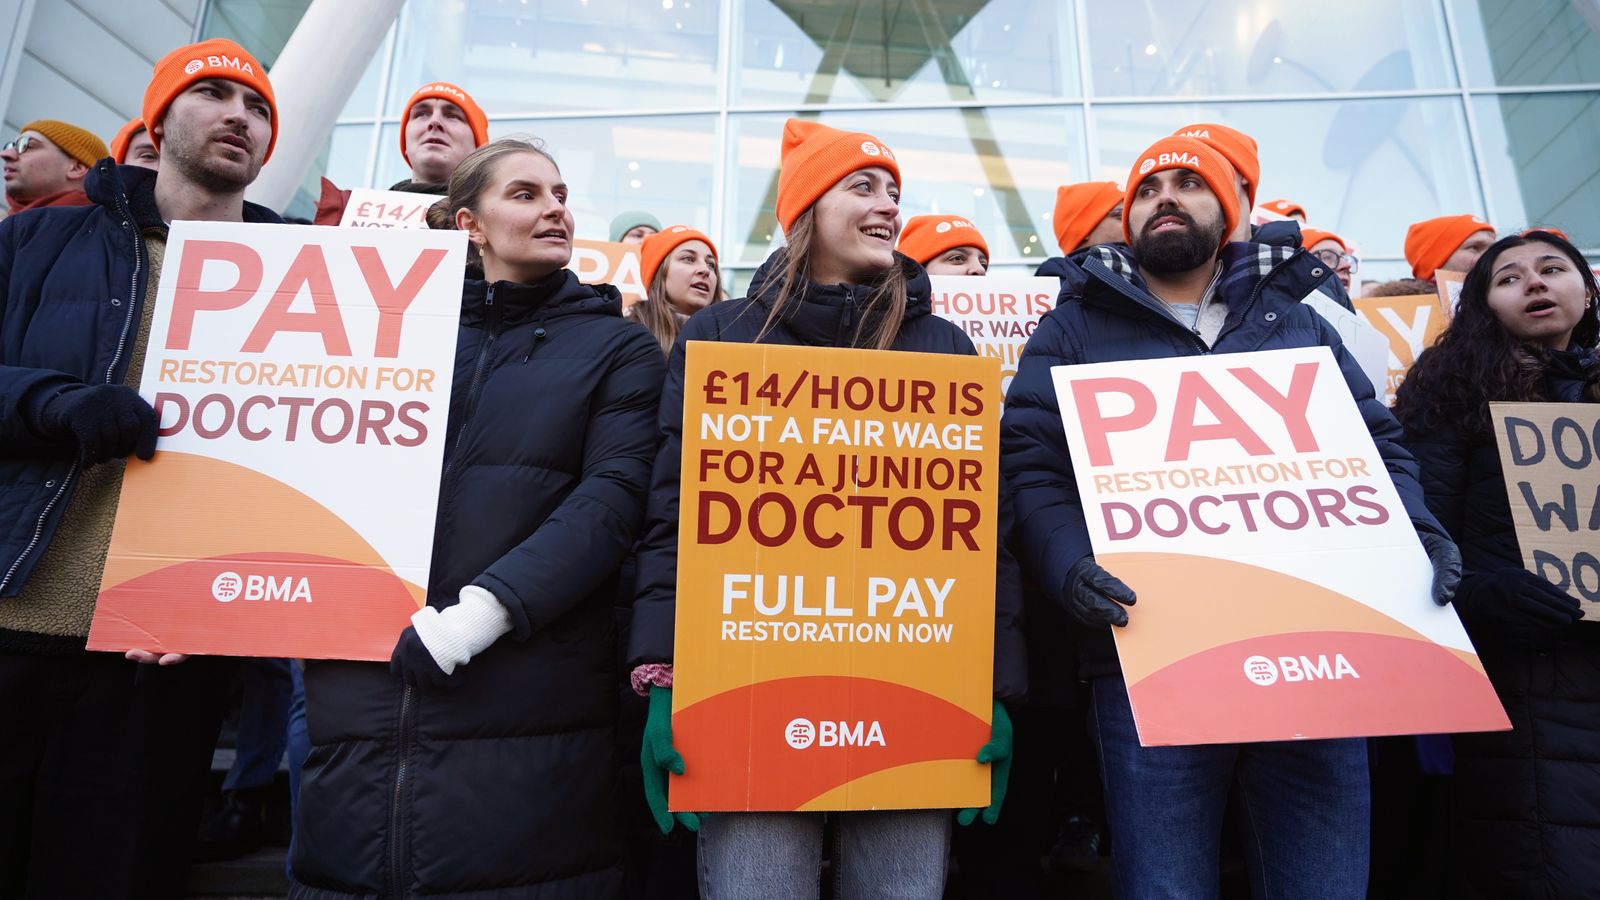 Government says 'door is open' for talks as junior doctors begin three days of strikes